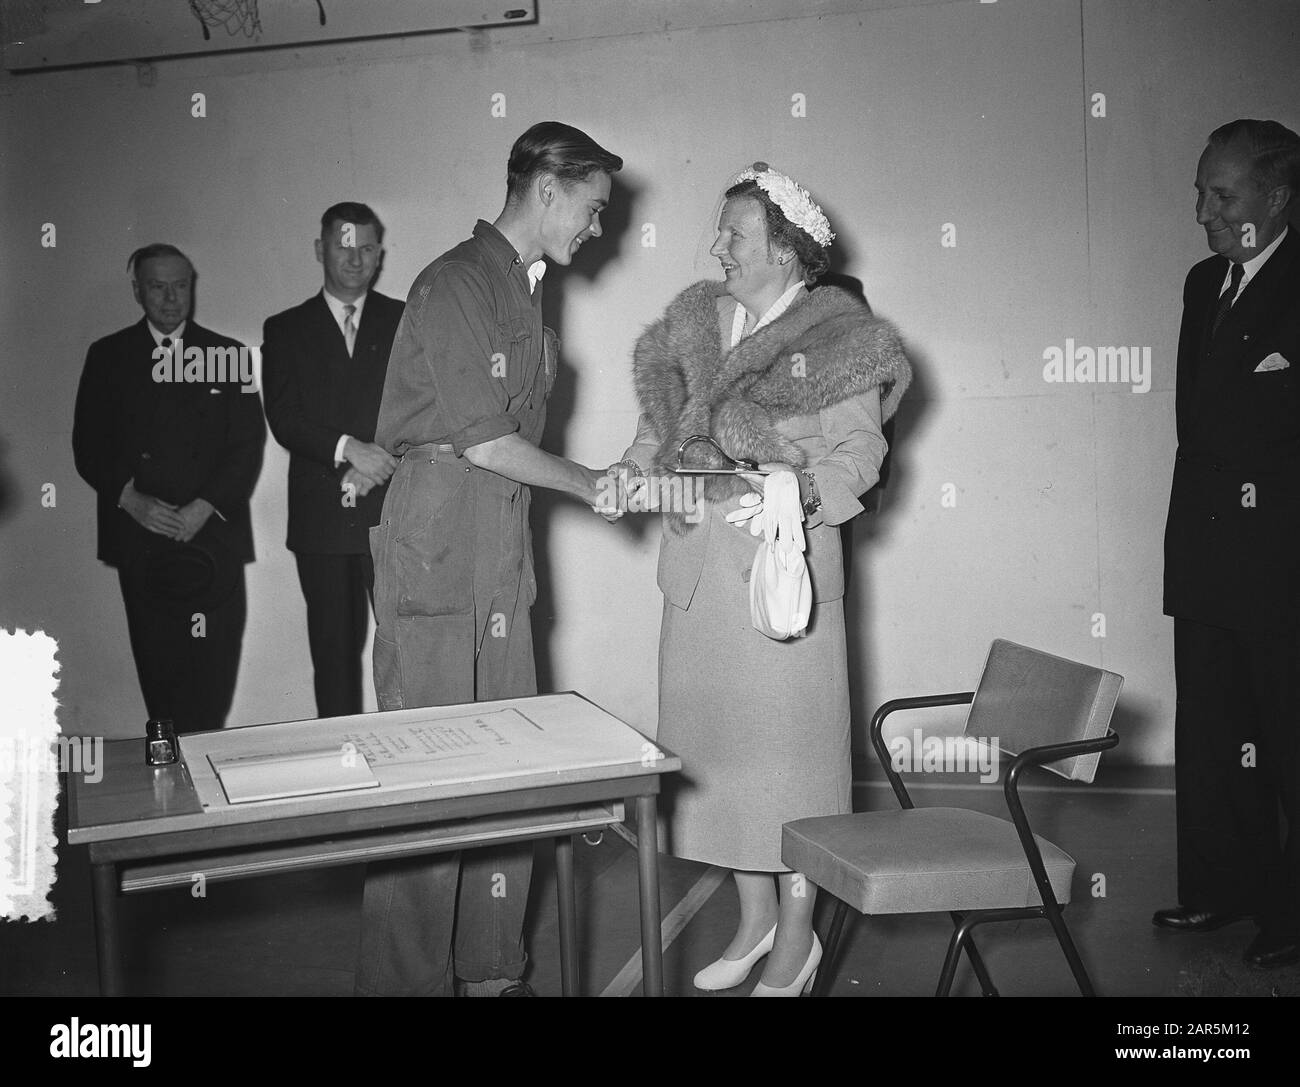 Queen Juliana visits the Havenvakschool (N.V. Thomsens) in Rotterdam Date: 31 May 1954 Location: Rotterdam, Zuid-Holland Keywords: queen Personname: Juliana, Queen Institution name : NV Thomsens Stock Photo